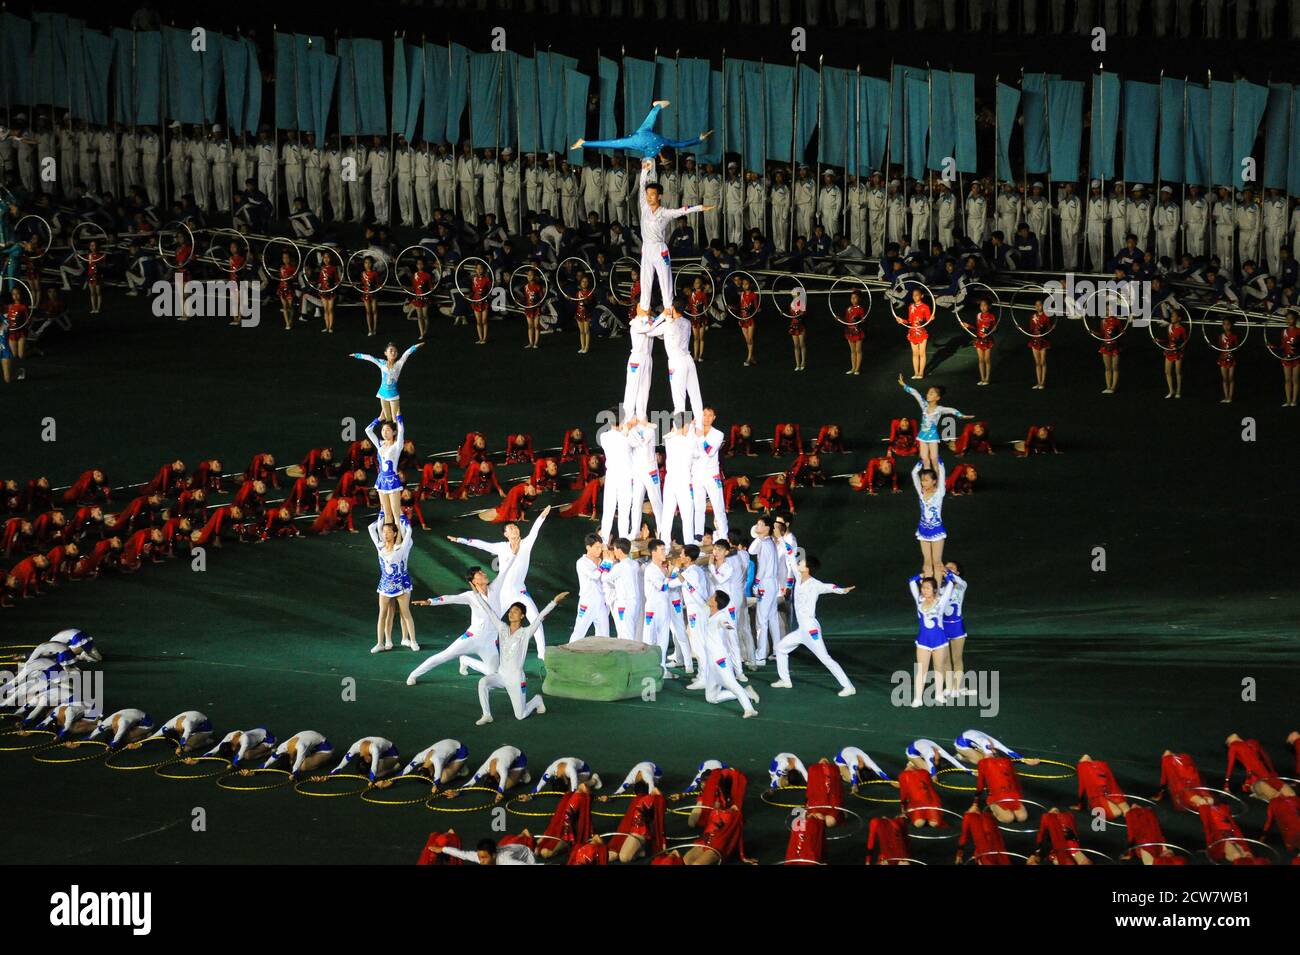 08.08.2012, Pyongyang, North Korea - Mass choreography and Artistic Performance with dancers and acrobats at May Day Stadium during Arirang Festival. Stock Photo